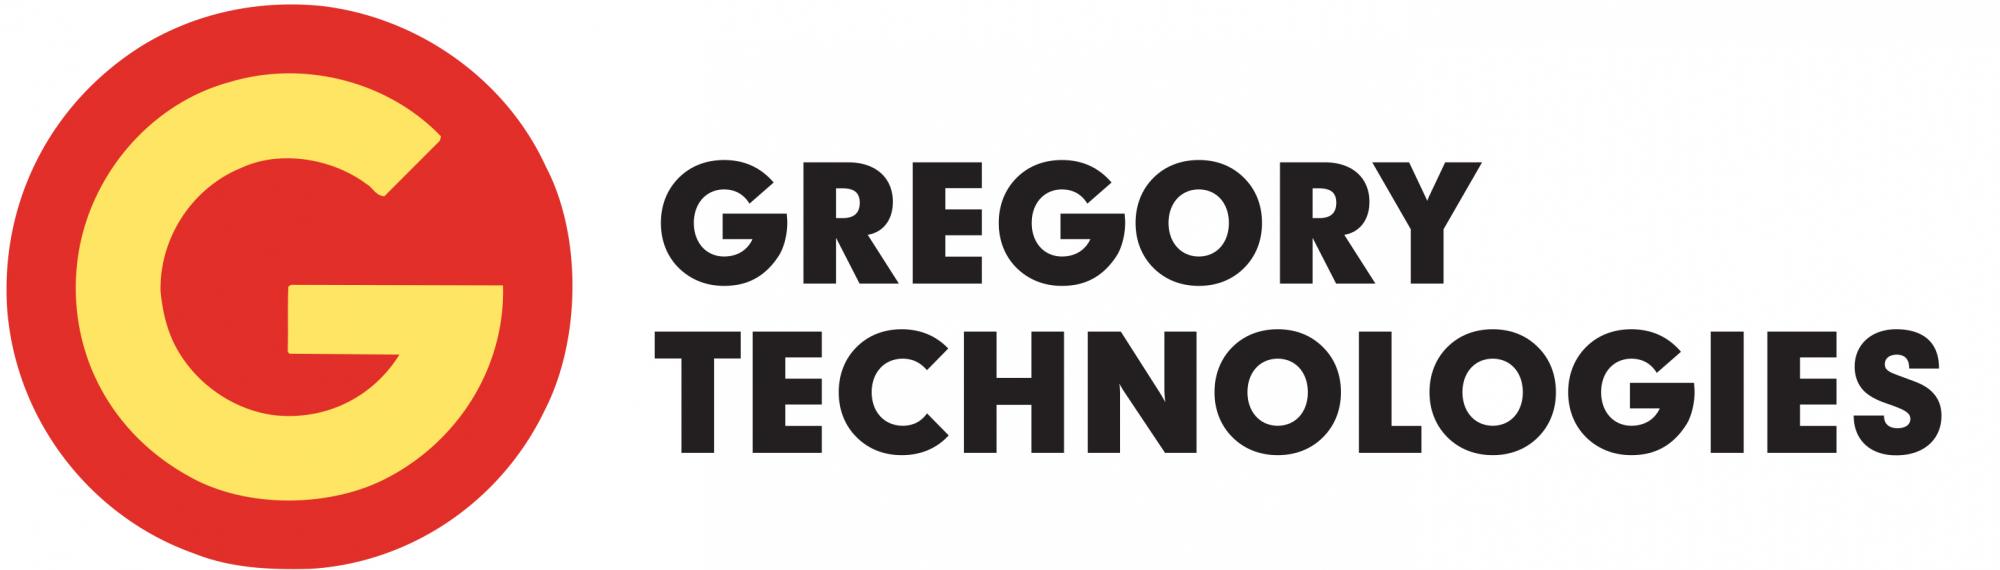 Gregory Technologies